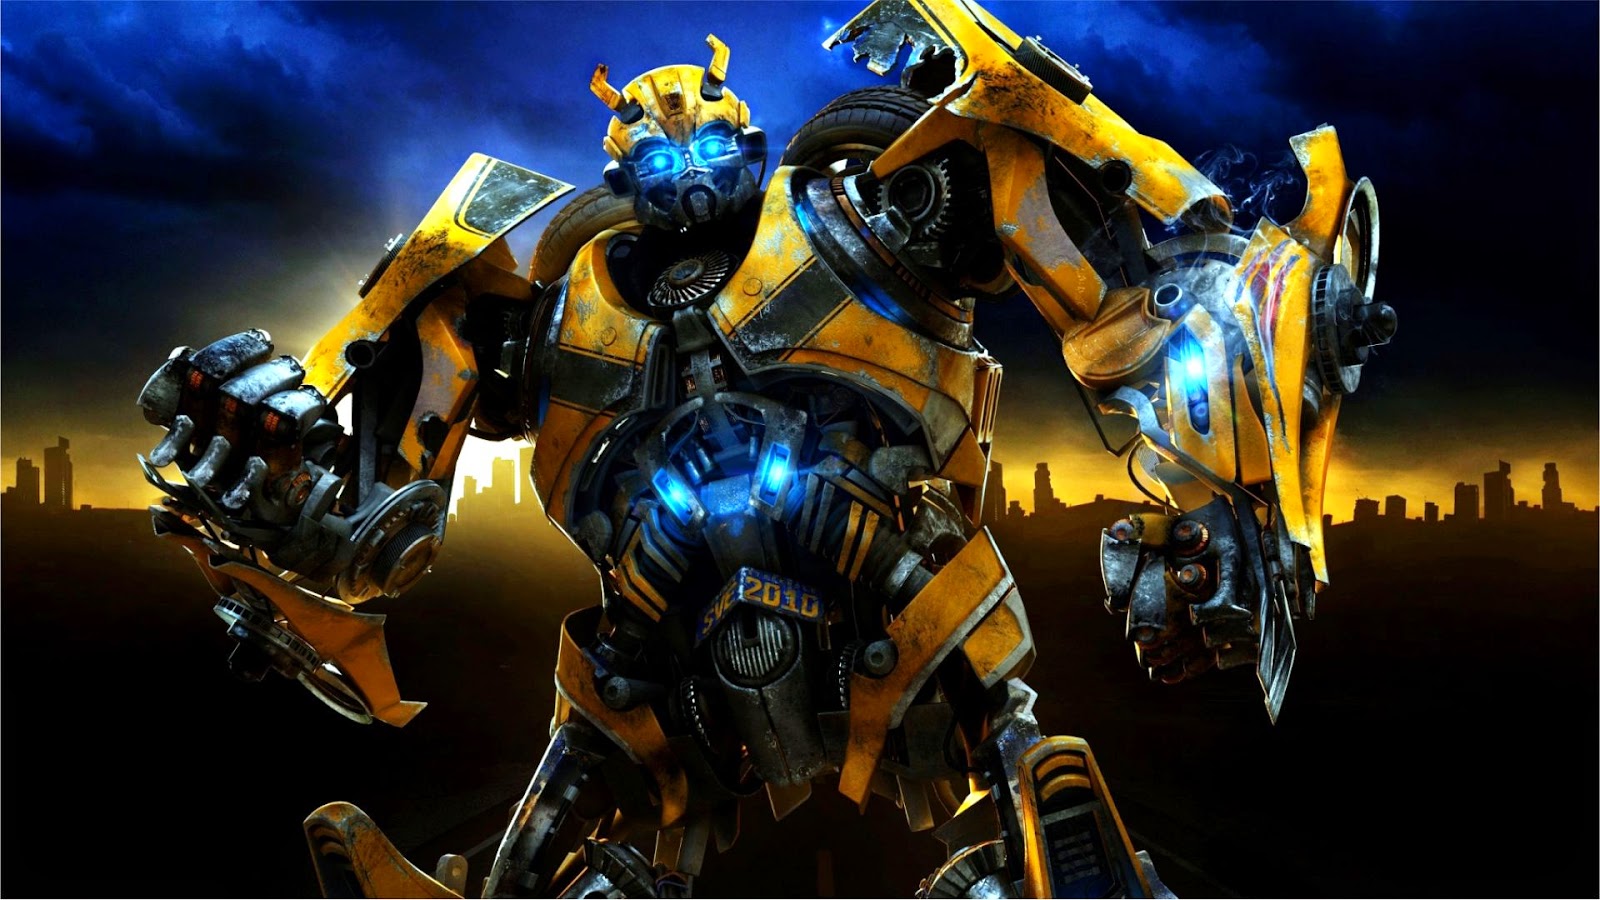 WALLPAPER ANDROID IPHONE Wallpaper Transformers HD